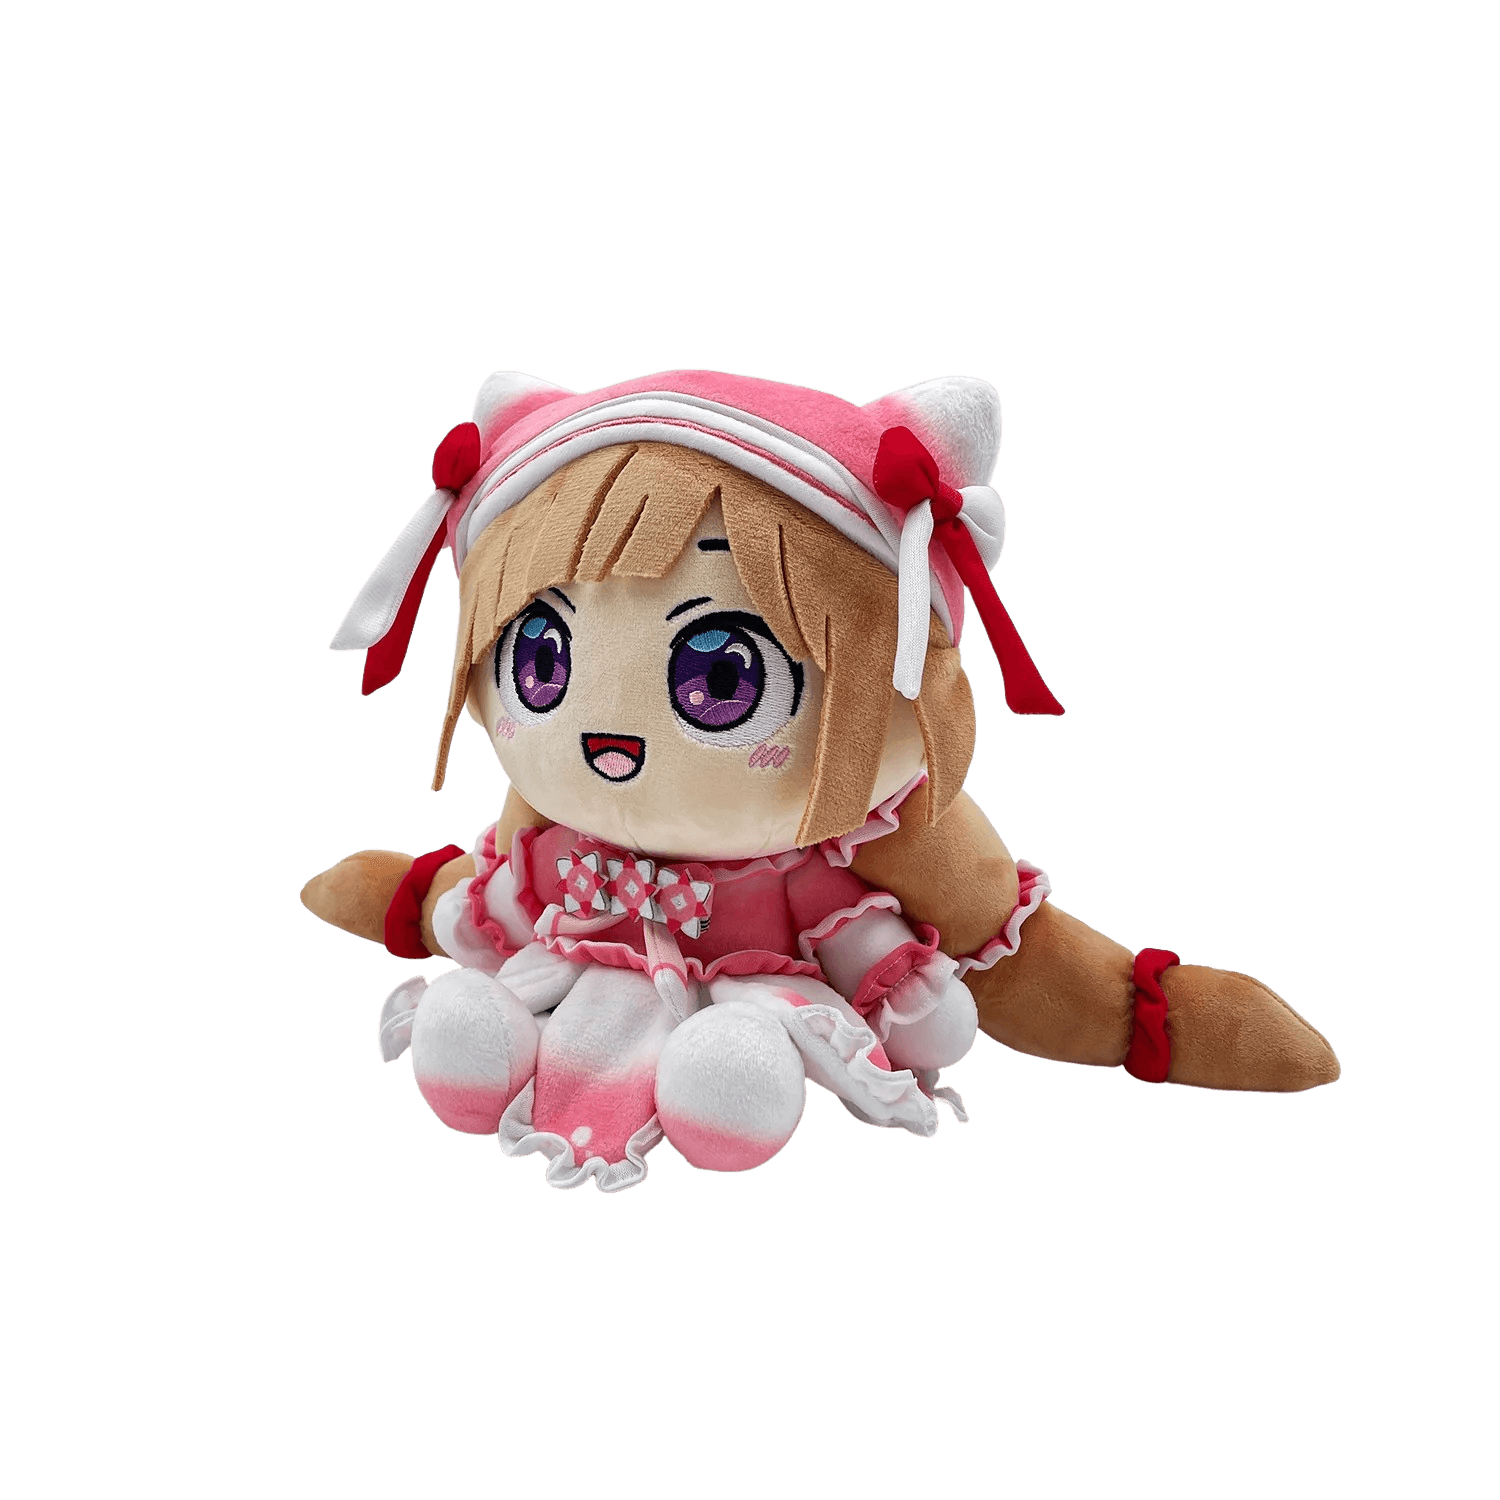 Youtooz - Obey Me! - Ruri-Chan Plush (9in) - The Card Vault